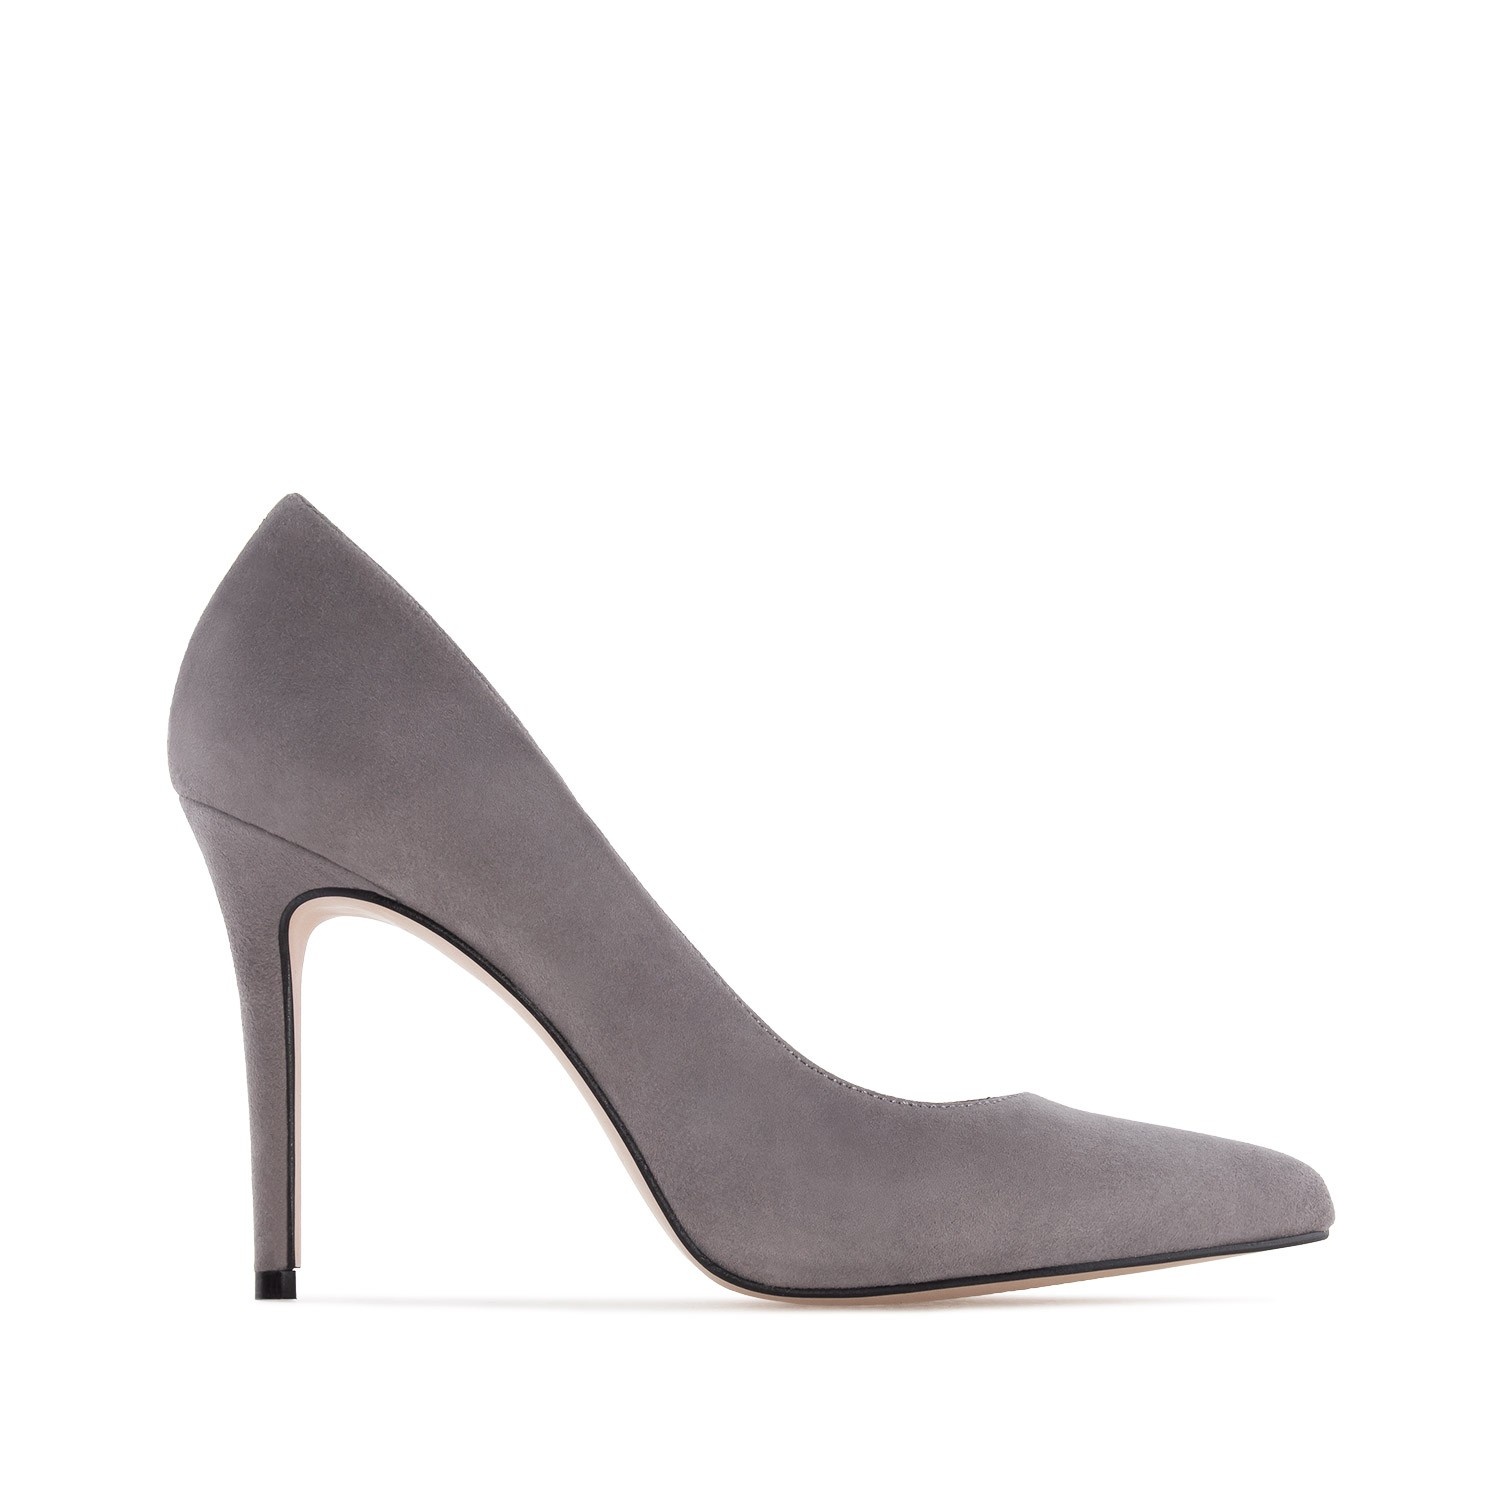 Heeled Shoes in Grey Suede Leather - Andrés Machado